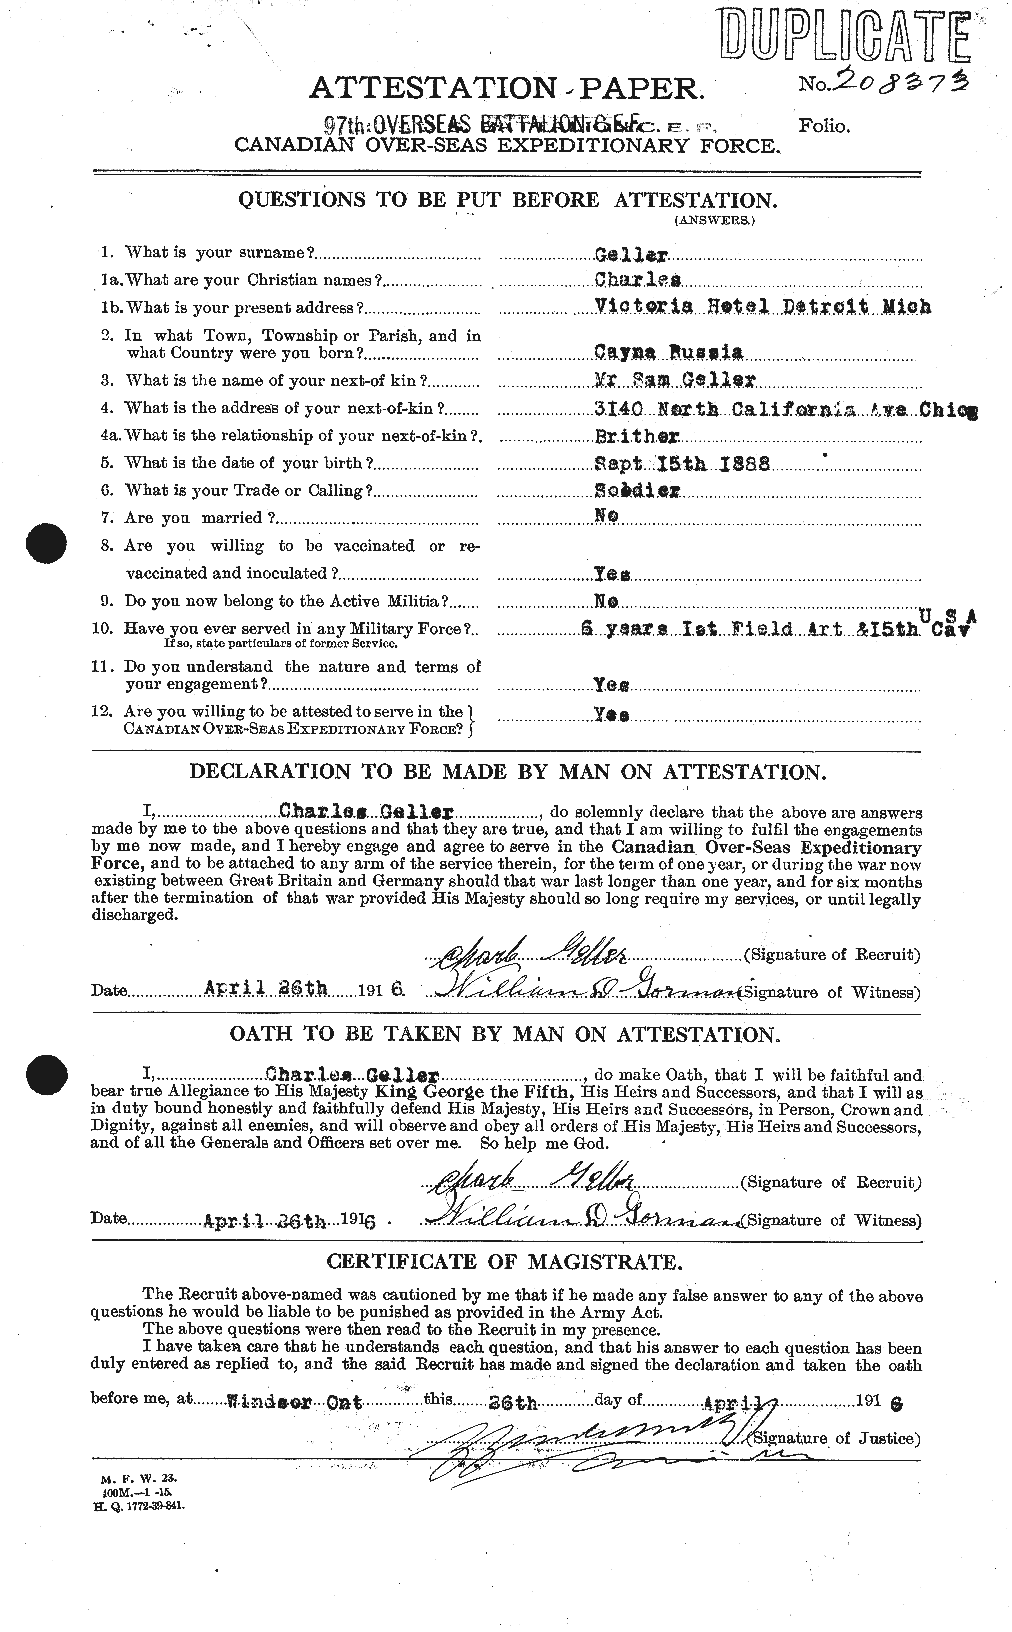 Personnel Records of the First World War - CEF 347495a